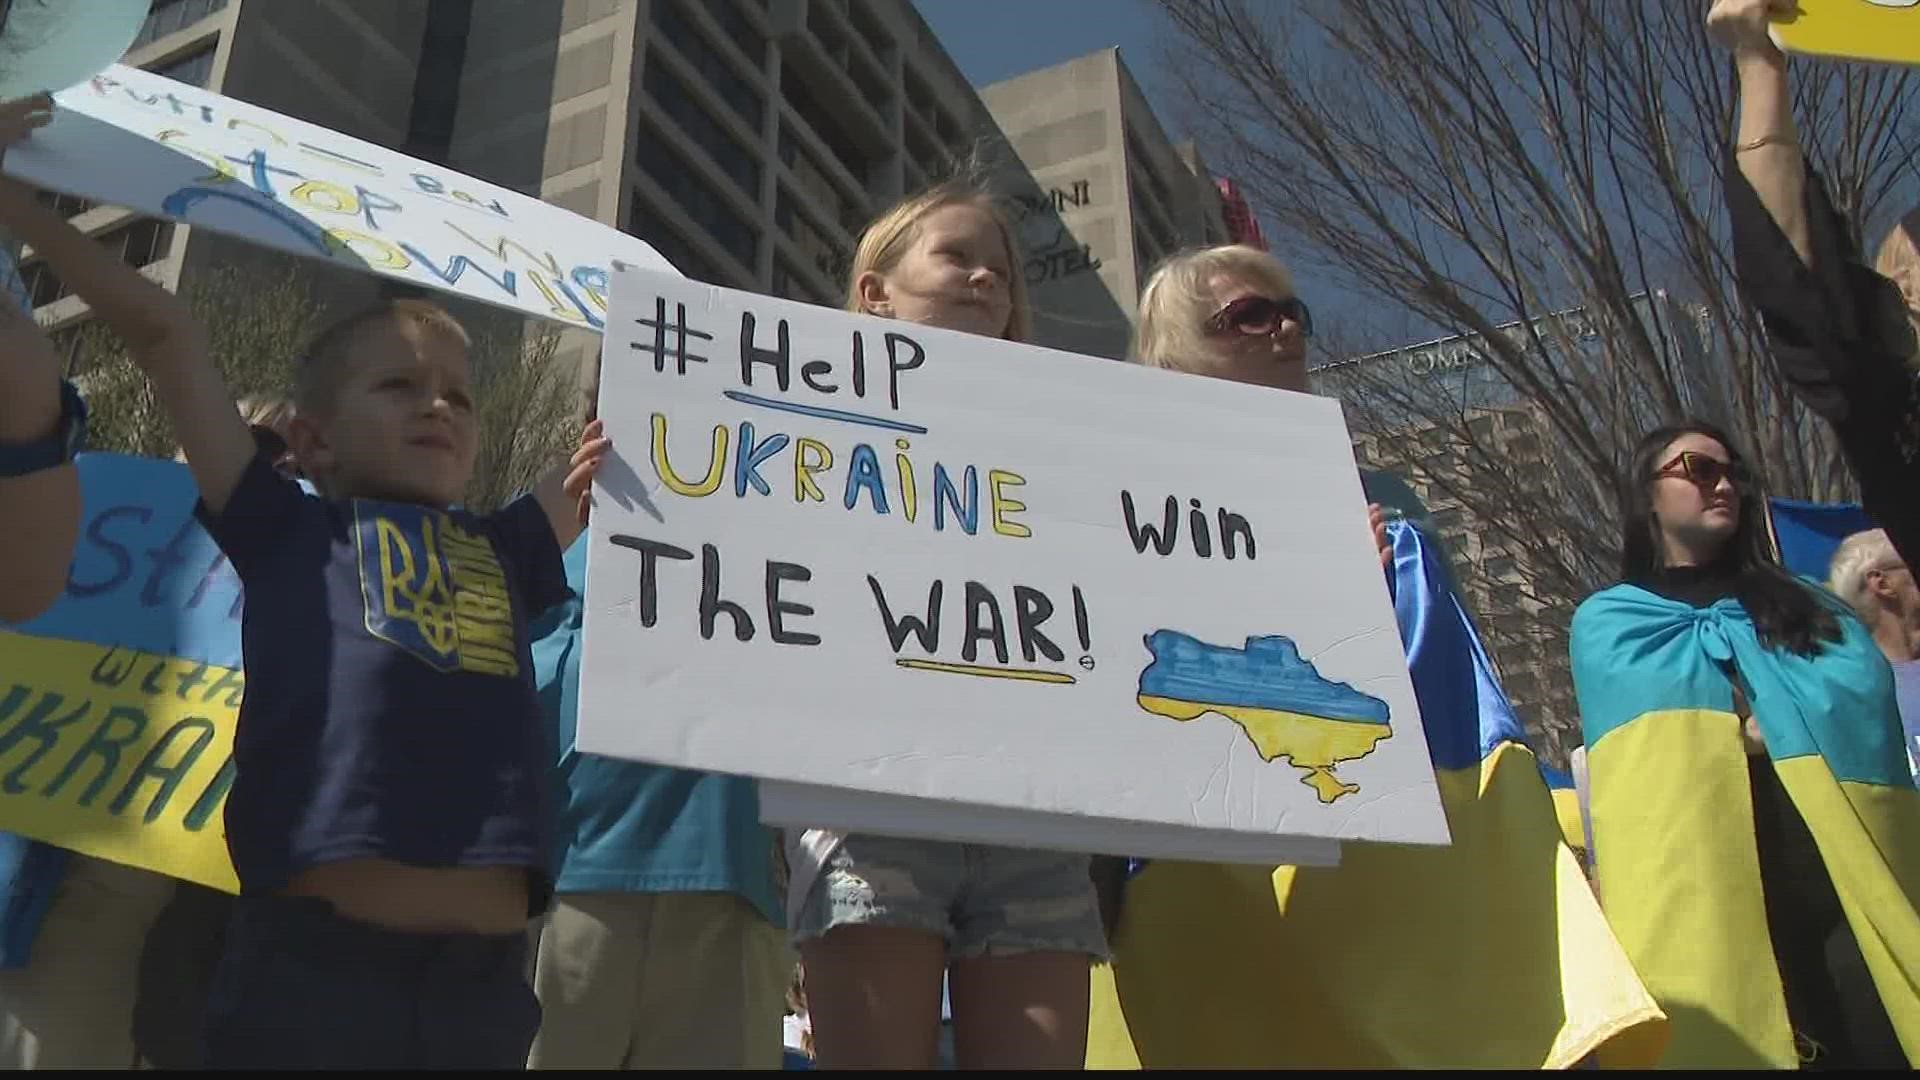 Here's an update on Russia's war on Ukraine and the fallout felt here in Atlanta.